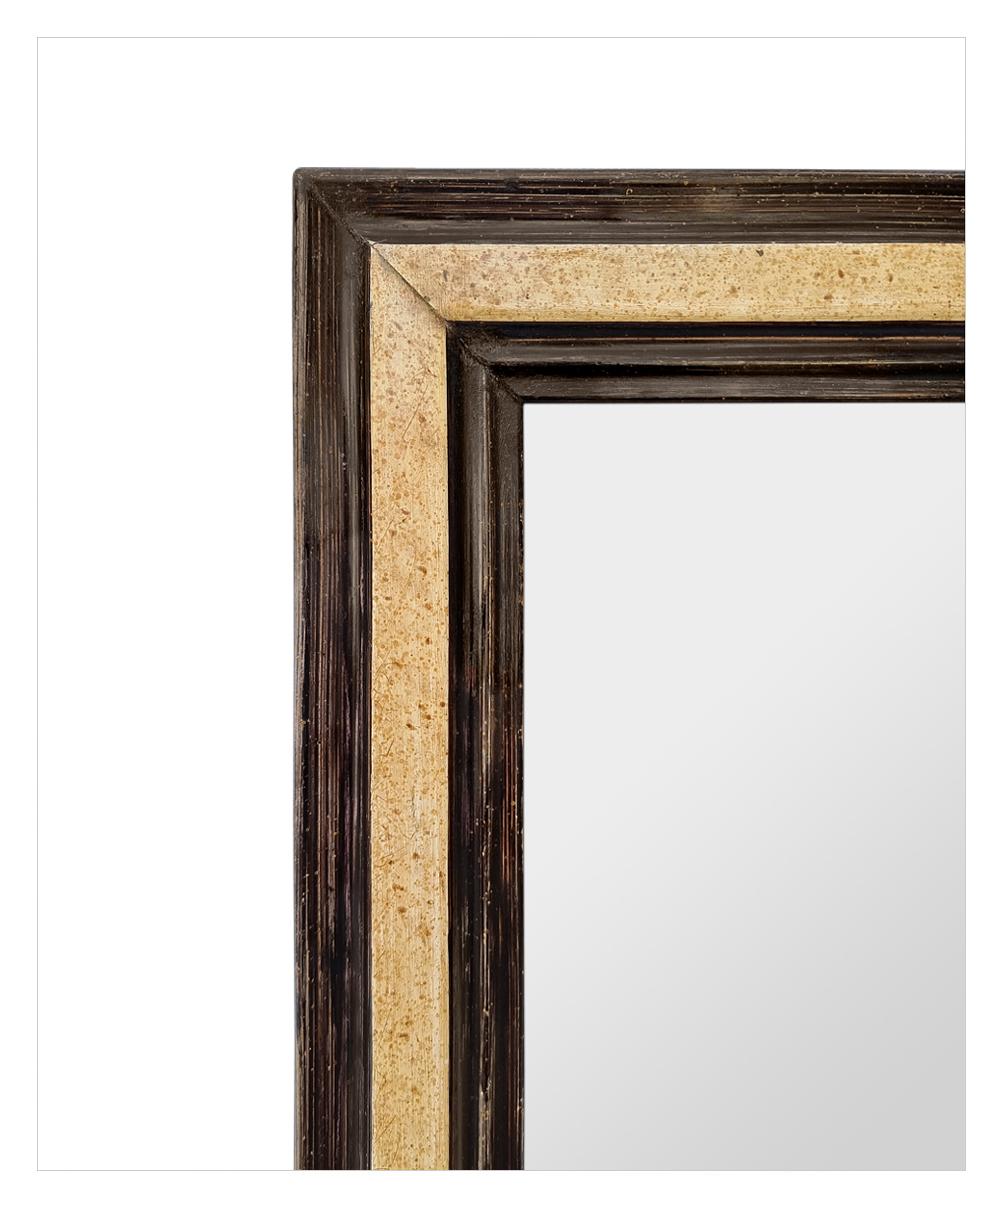 Late 19th Century Antique French Wood Mirror Painted Flemish Style Inspiration, circa 1880 For Sale